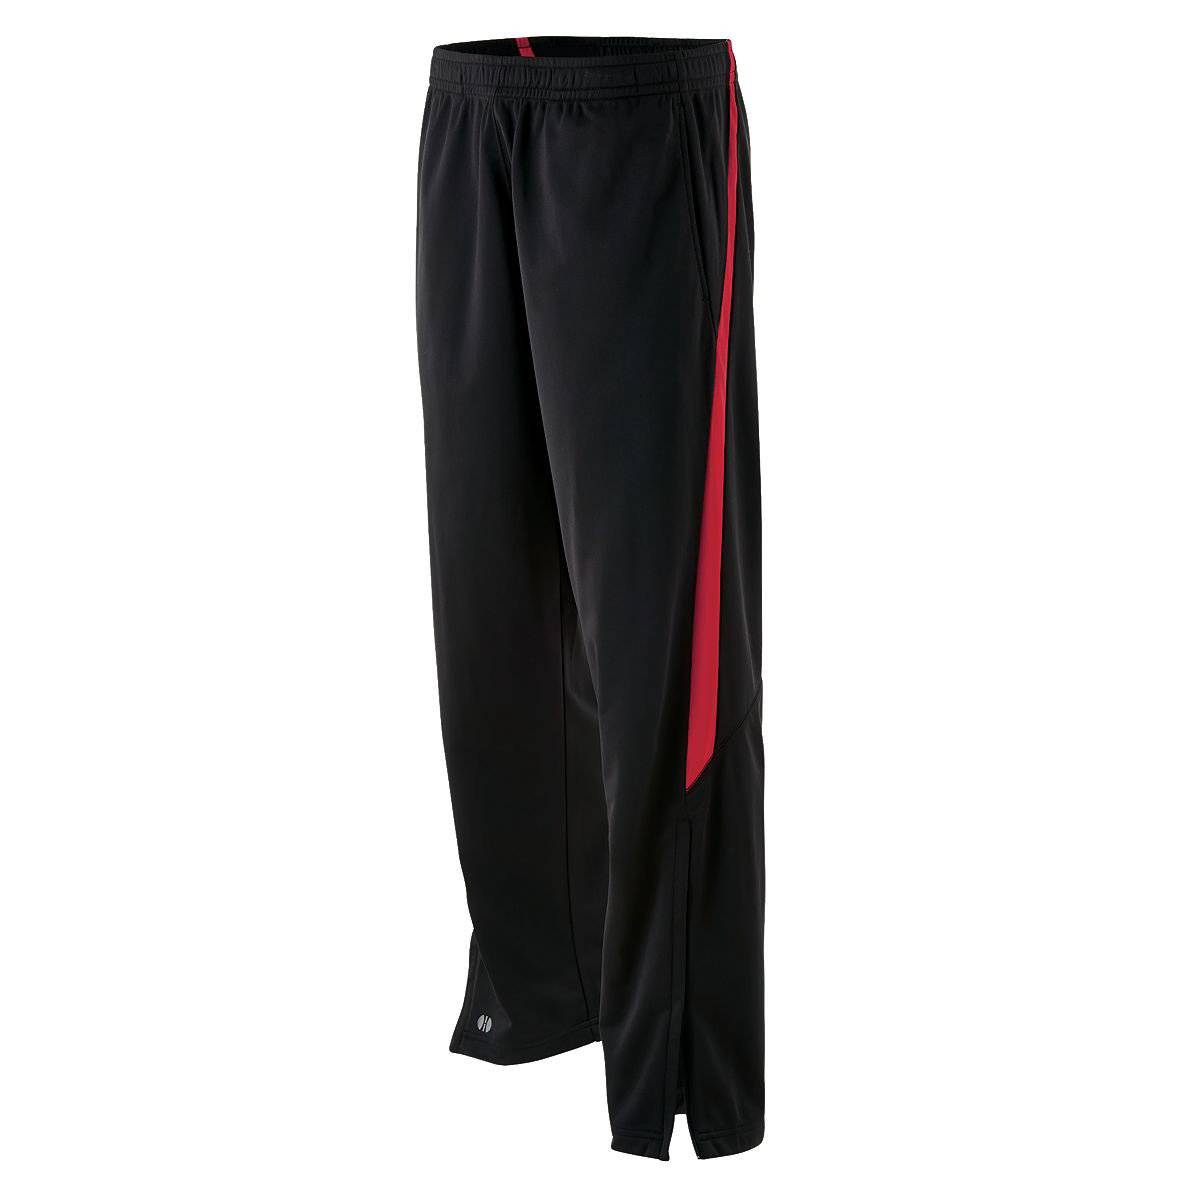 Black Red - style-pants-piping - style-pants-piping